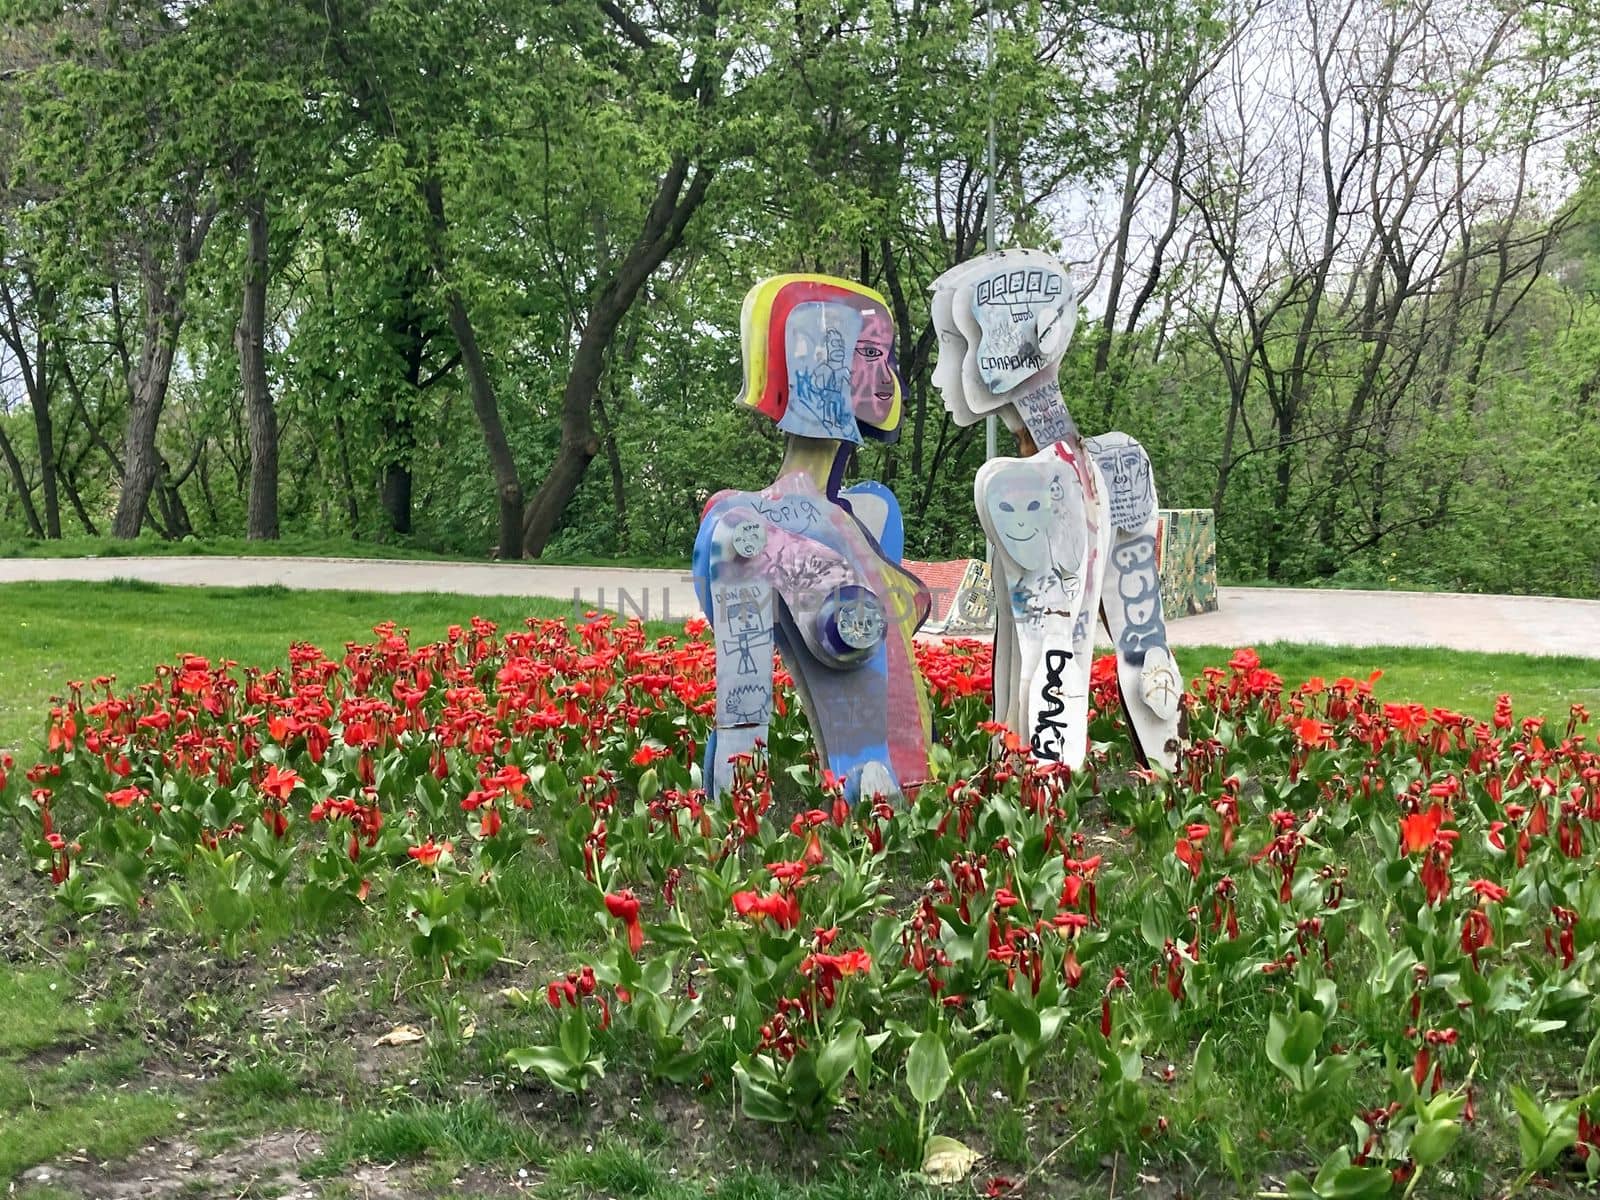 Sacral Hi-Tech Sculpture. Sculpture In the park in the form of figures of a man and a woman painted with graffiti, among flowers. Kiev Ukraine 02-21-2023 by mr-tigga